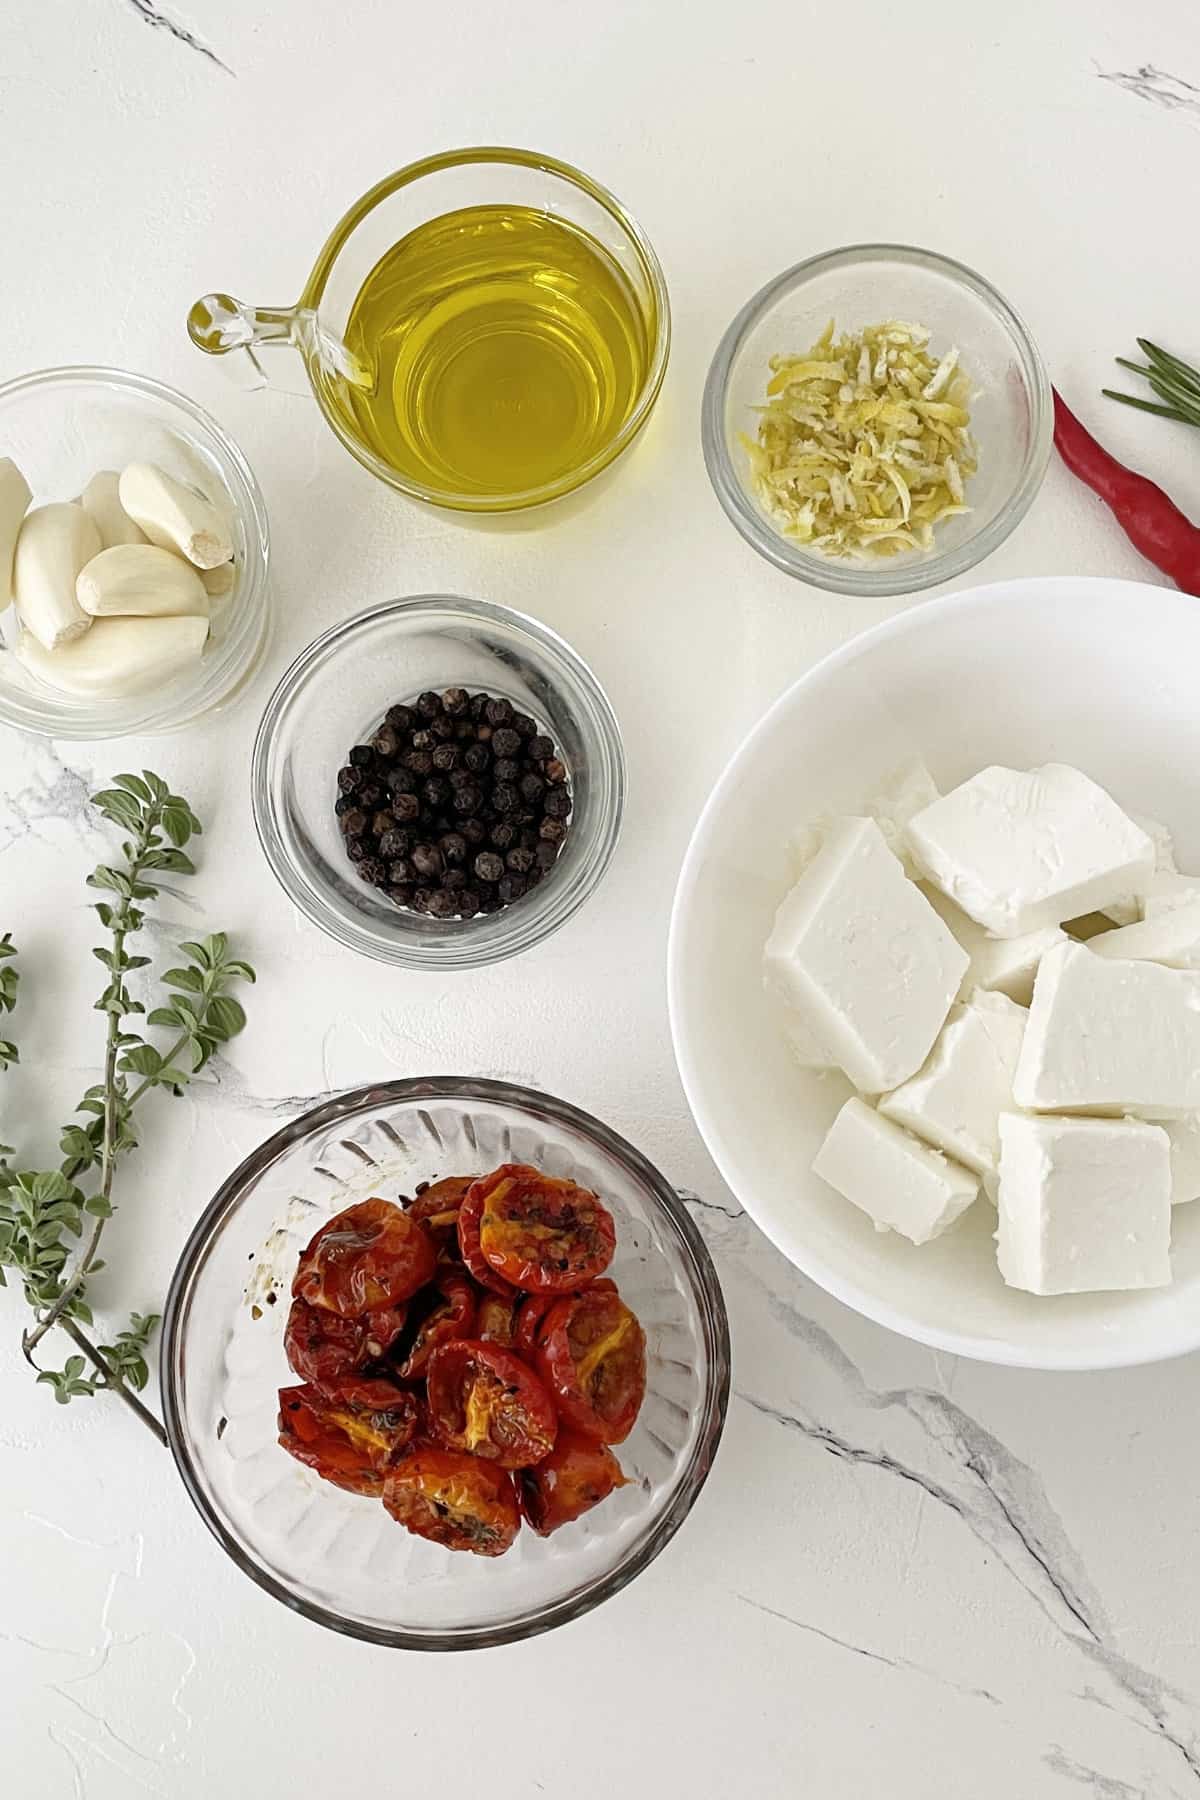 ingredients for marinating feta cheese with olive oil and herbs.